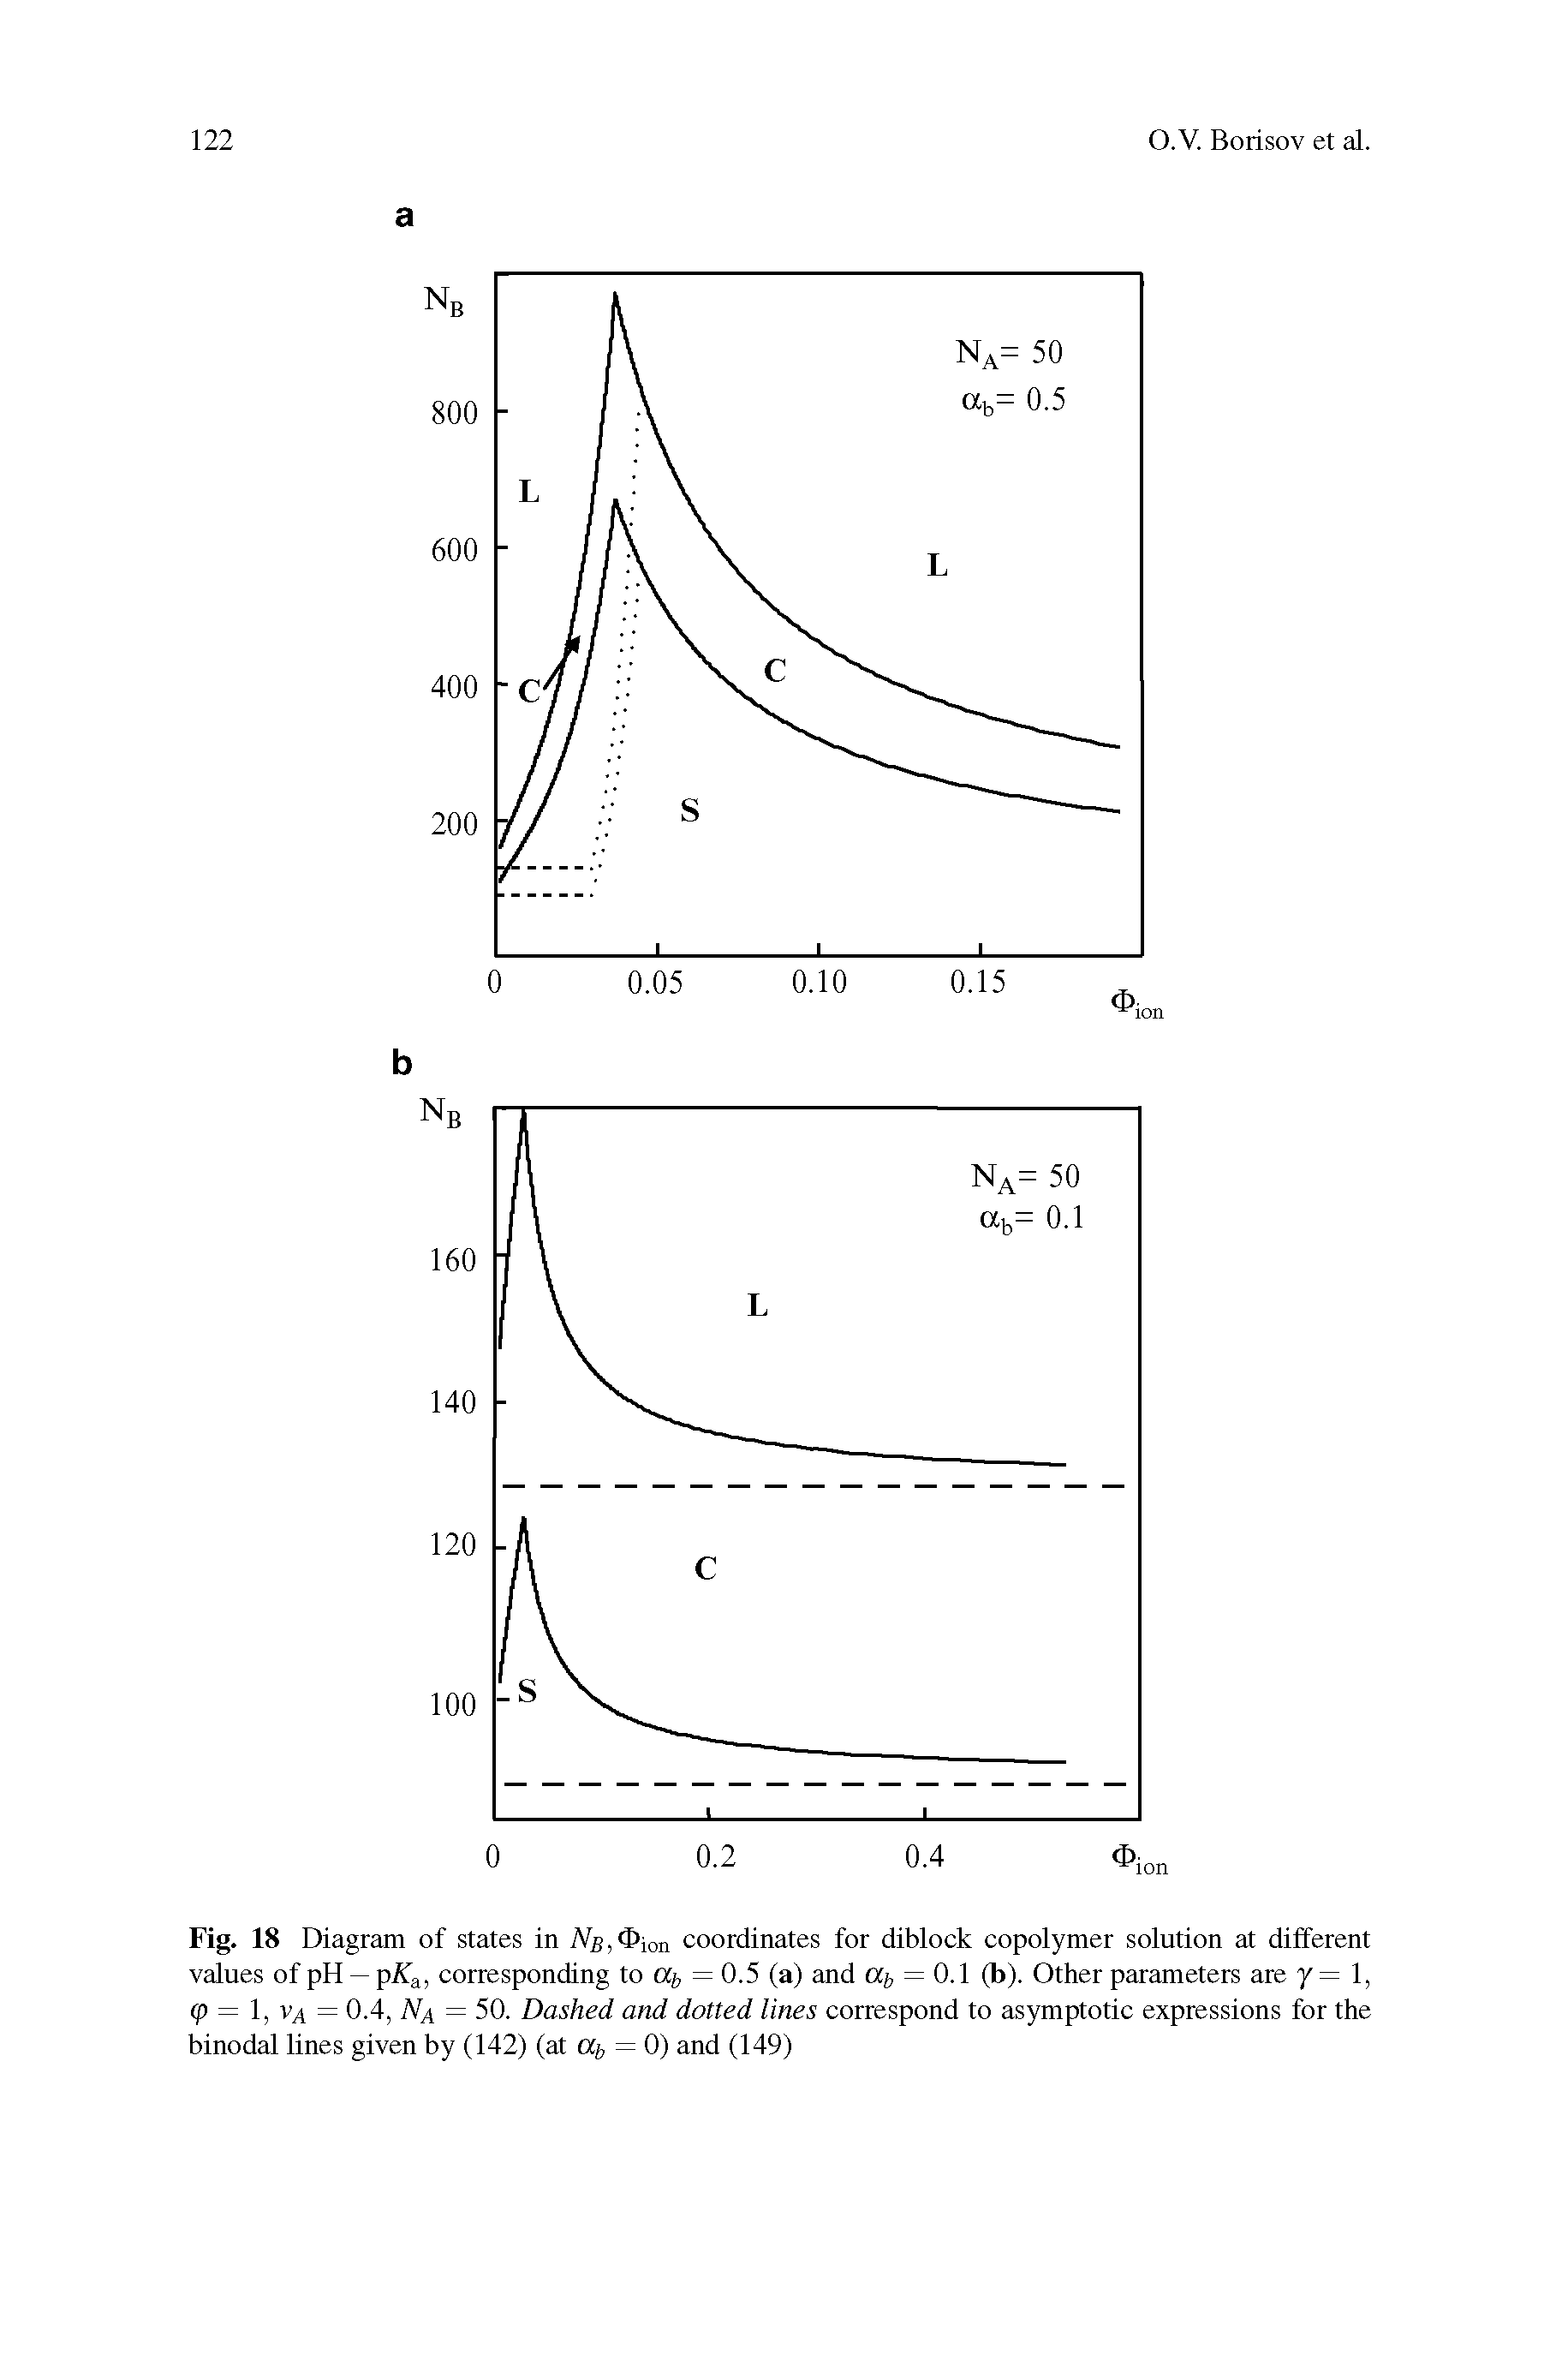 Fig. 18 Diagram of states in Nb, ion coordinates for diblock copolymer solution at different values of pH — p f, corresponding to Ui, =0.5 (a) and aj = 0.1 (b). Other parameters are 7=1, (p = 1, va = 0.4, Na = 50. Dashed and dotted lines correspond to asymptotic expressions for the binodal lines given by (142) (at = 0) and (149)...